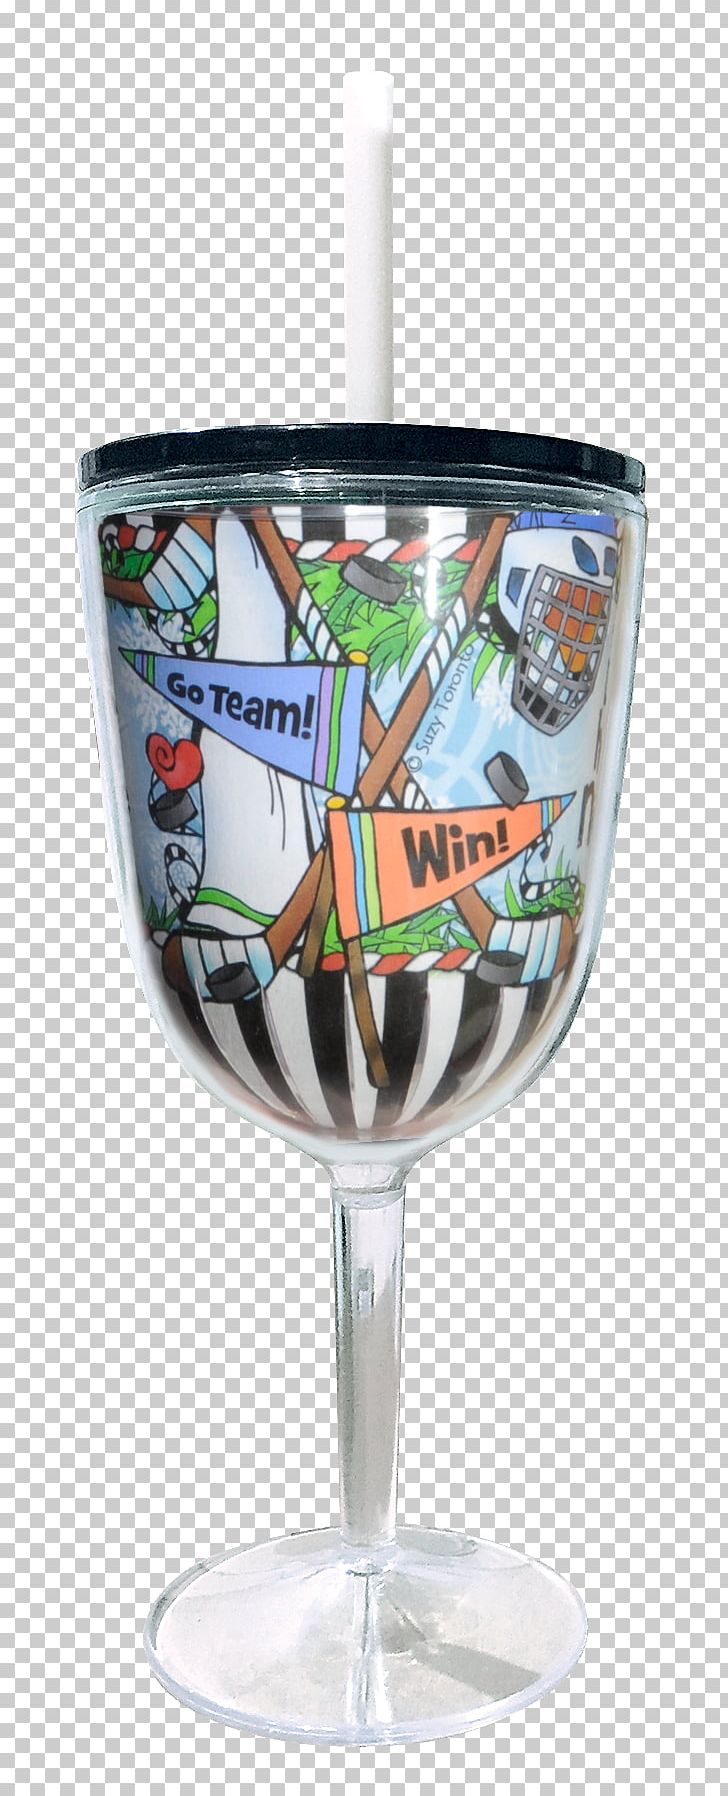 Wine Glass Champagne Glass Mug Product Design PNG, Clipart, Abcd, Art, Champagne Glass, Champagne Stemware, Cocktail Glass Free PNG Download